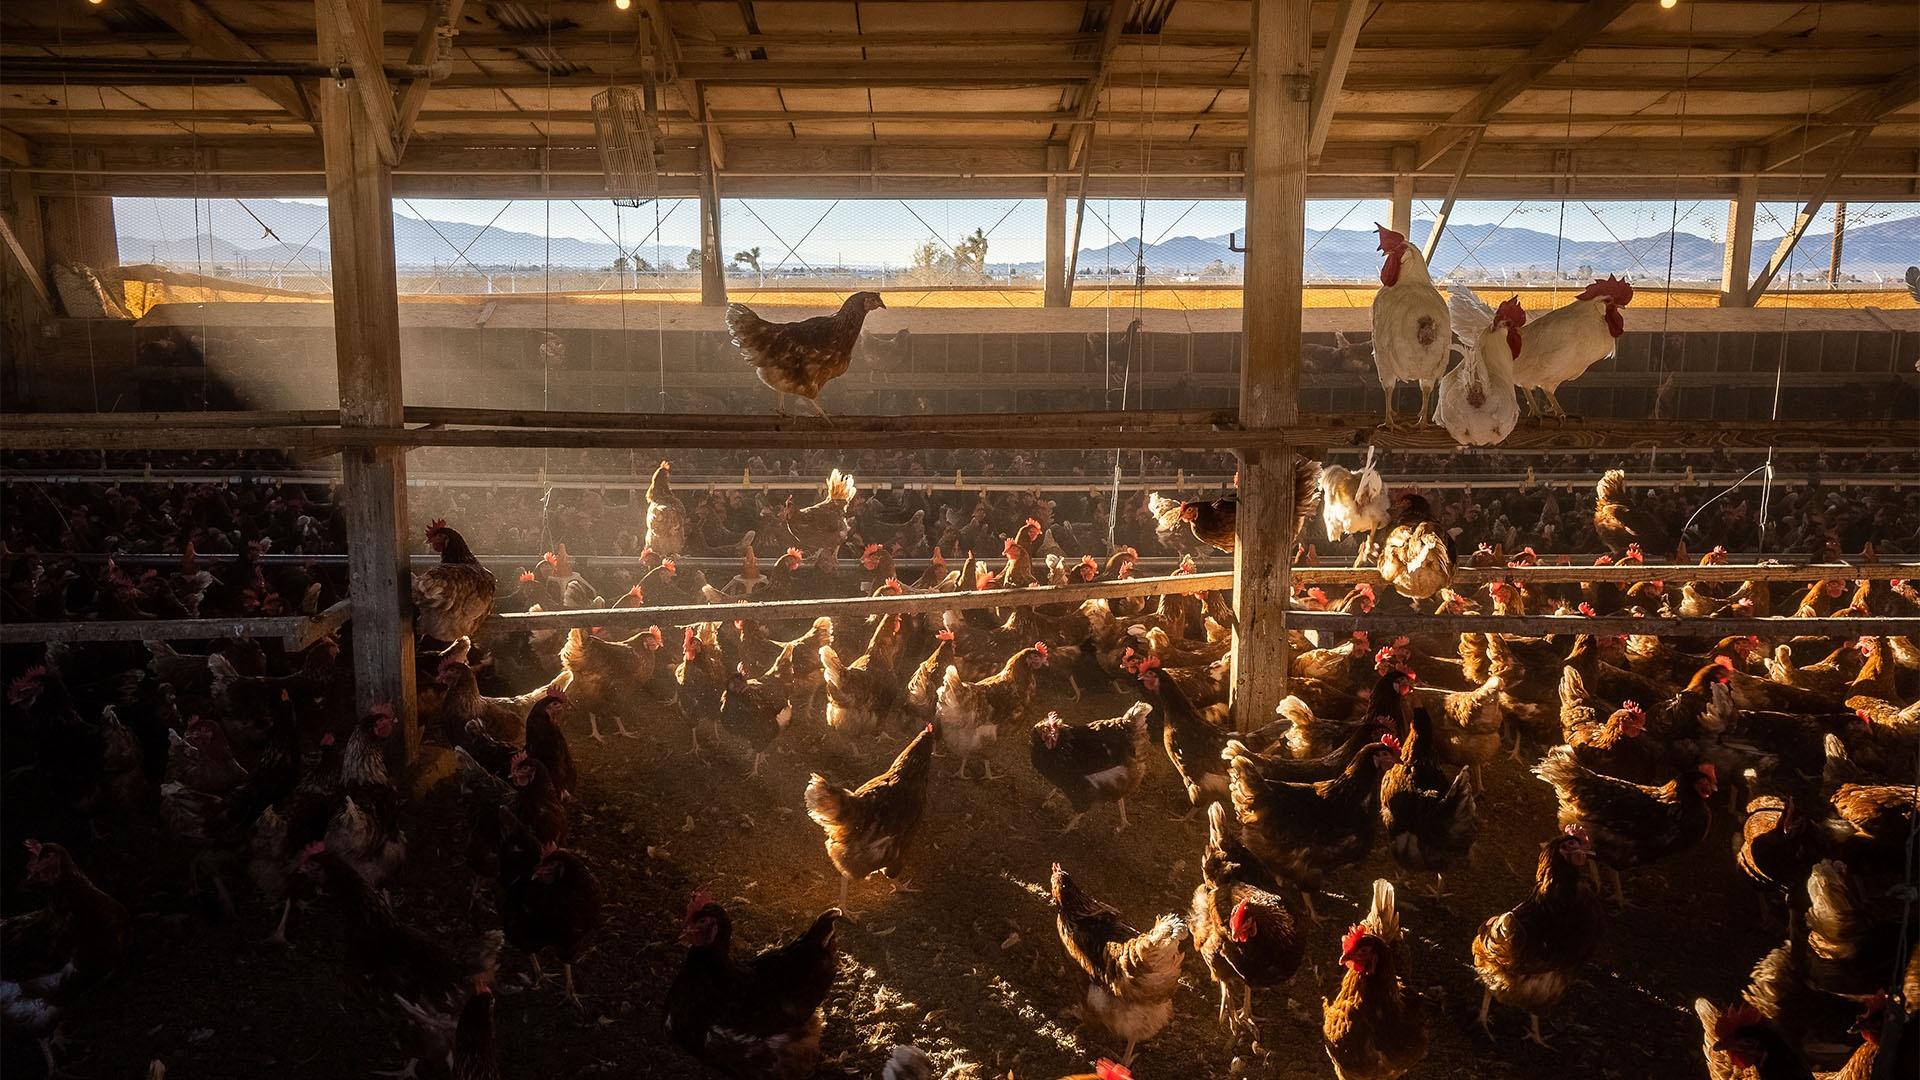 A single frame of a timelapse of Cage free chickens moving around their pen at a farm in San Diego.